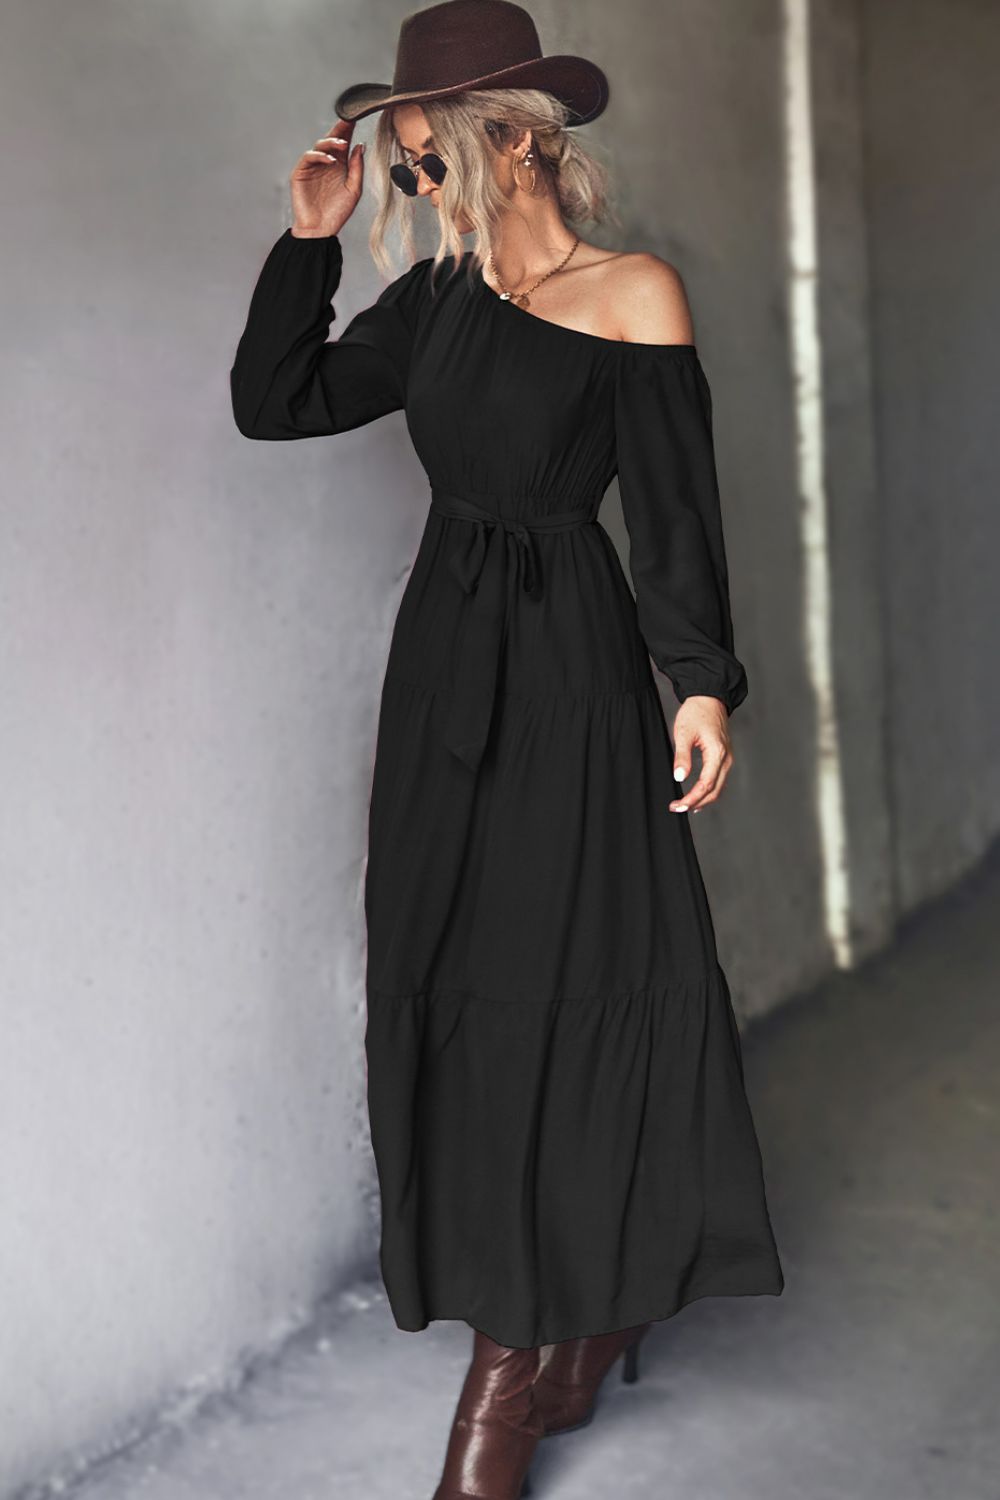 Off The Shoulder Tiered Maxi Dress in Black or Green